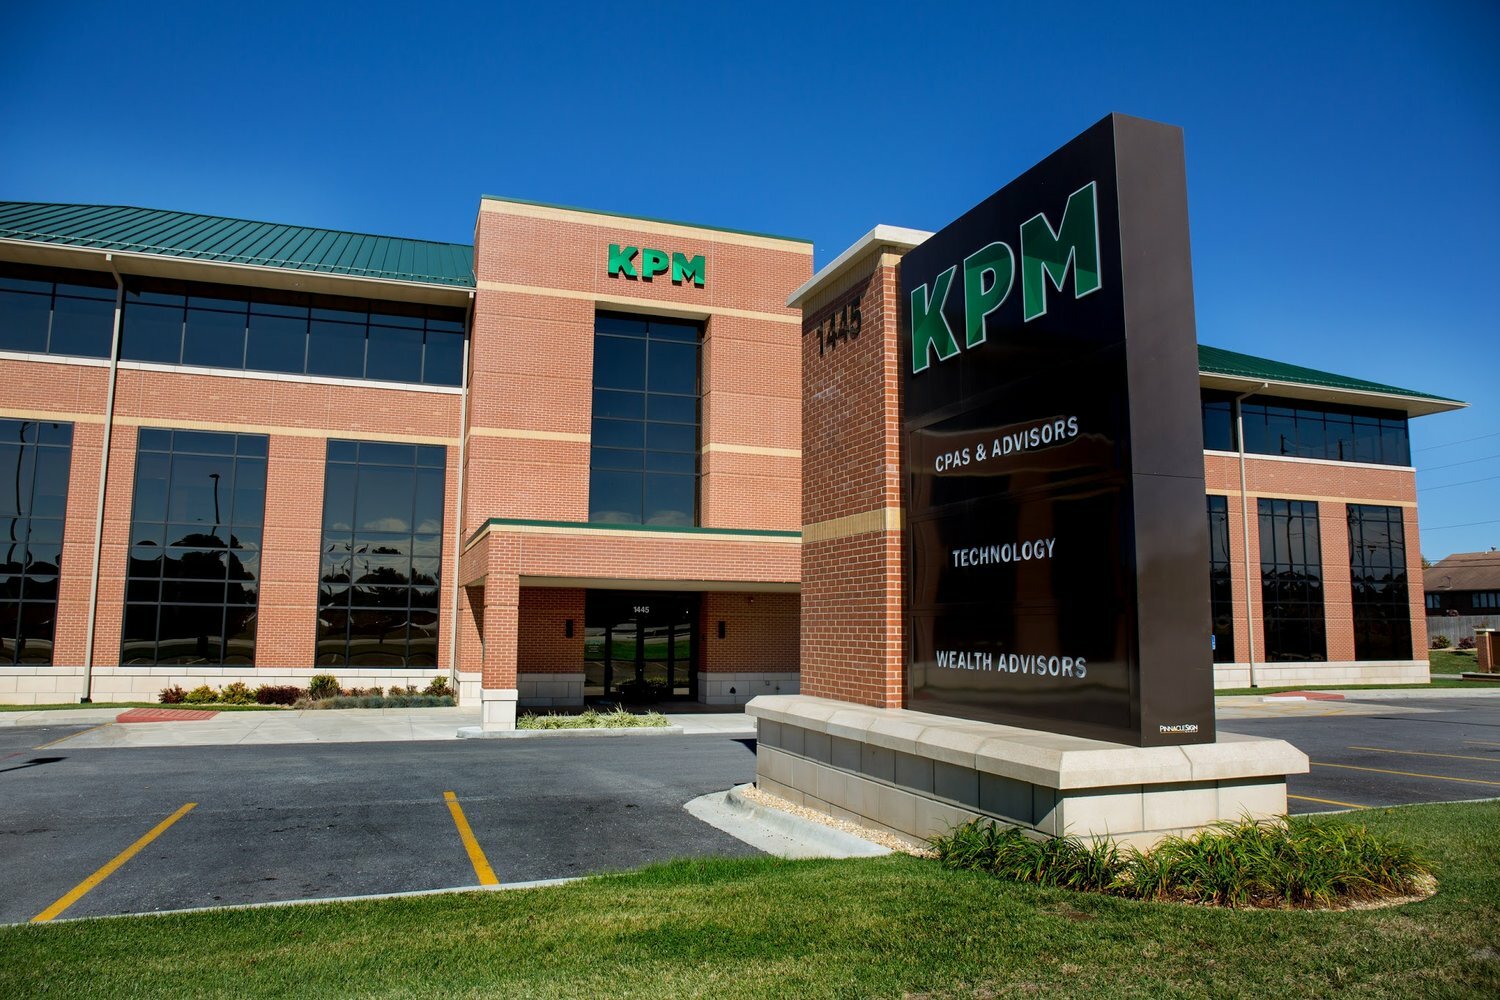 KPM CPAs & Advisors is among the top firms in the Midwest, according to Accounting Today.